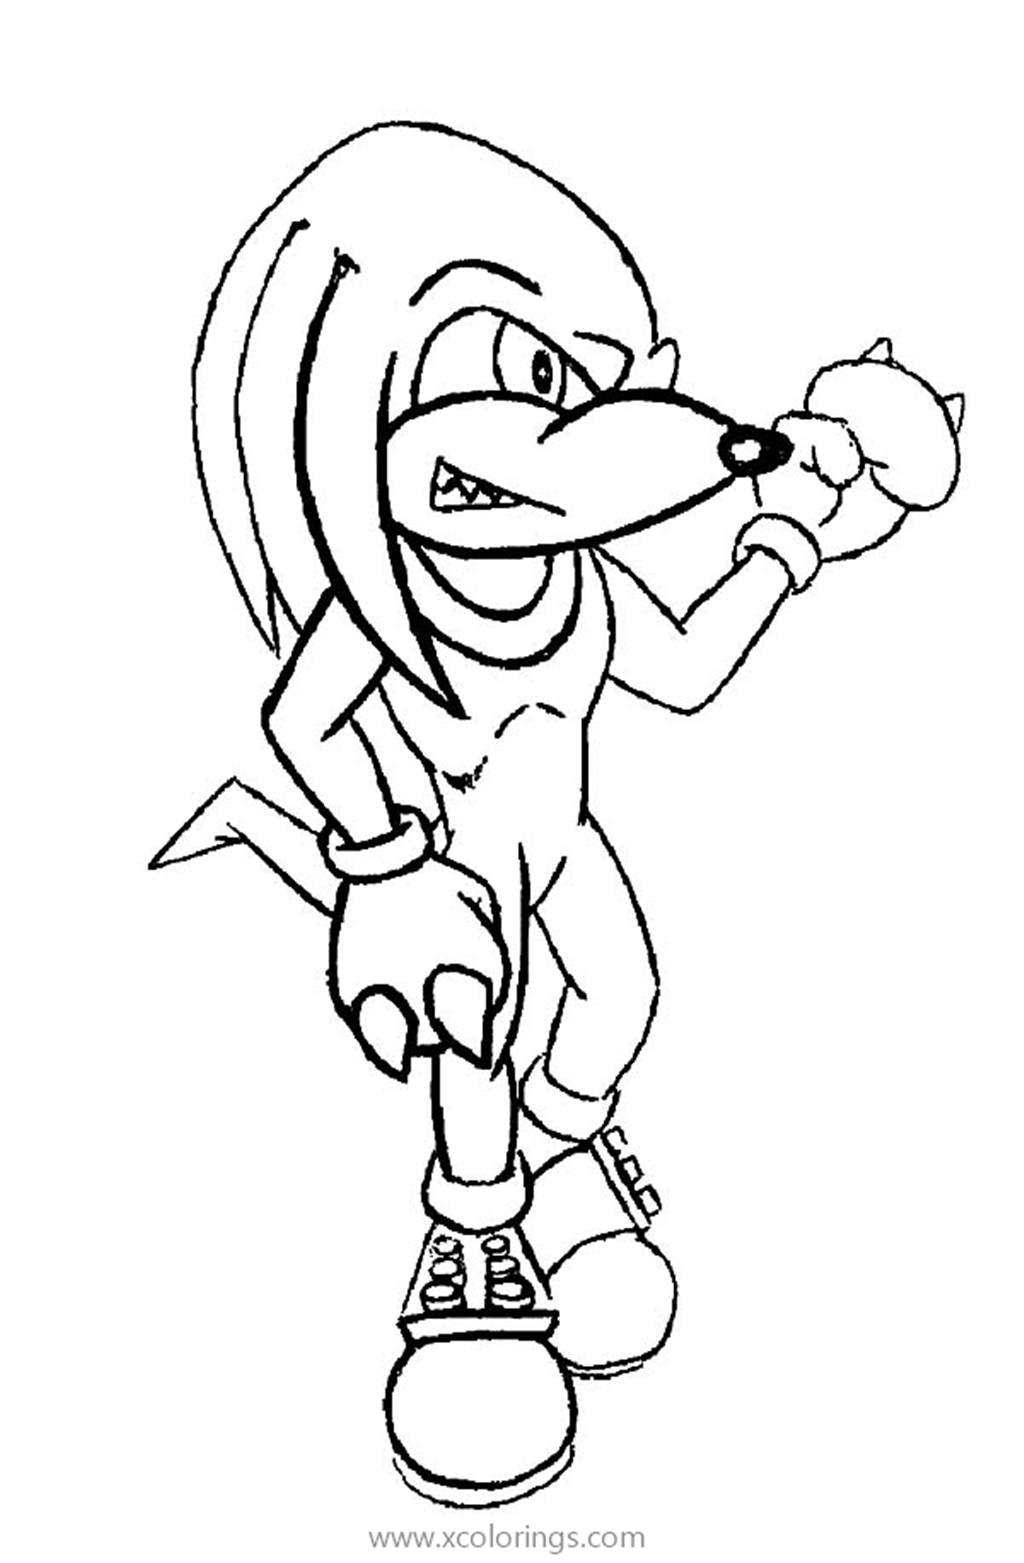 Free Character Knuckles The Echidna Coloring Pages printable